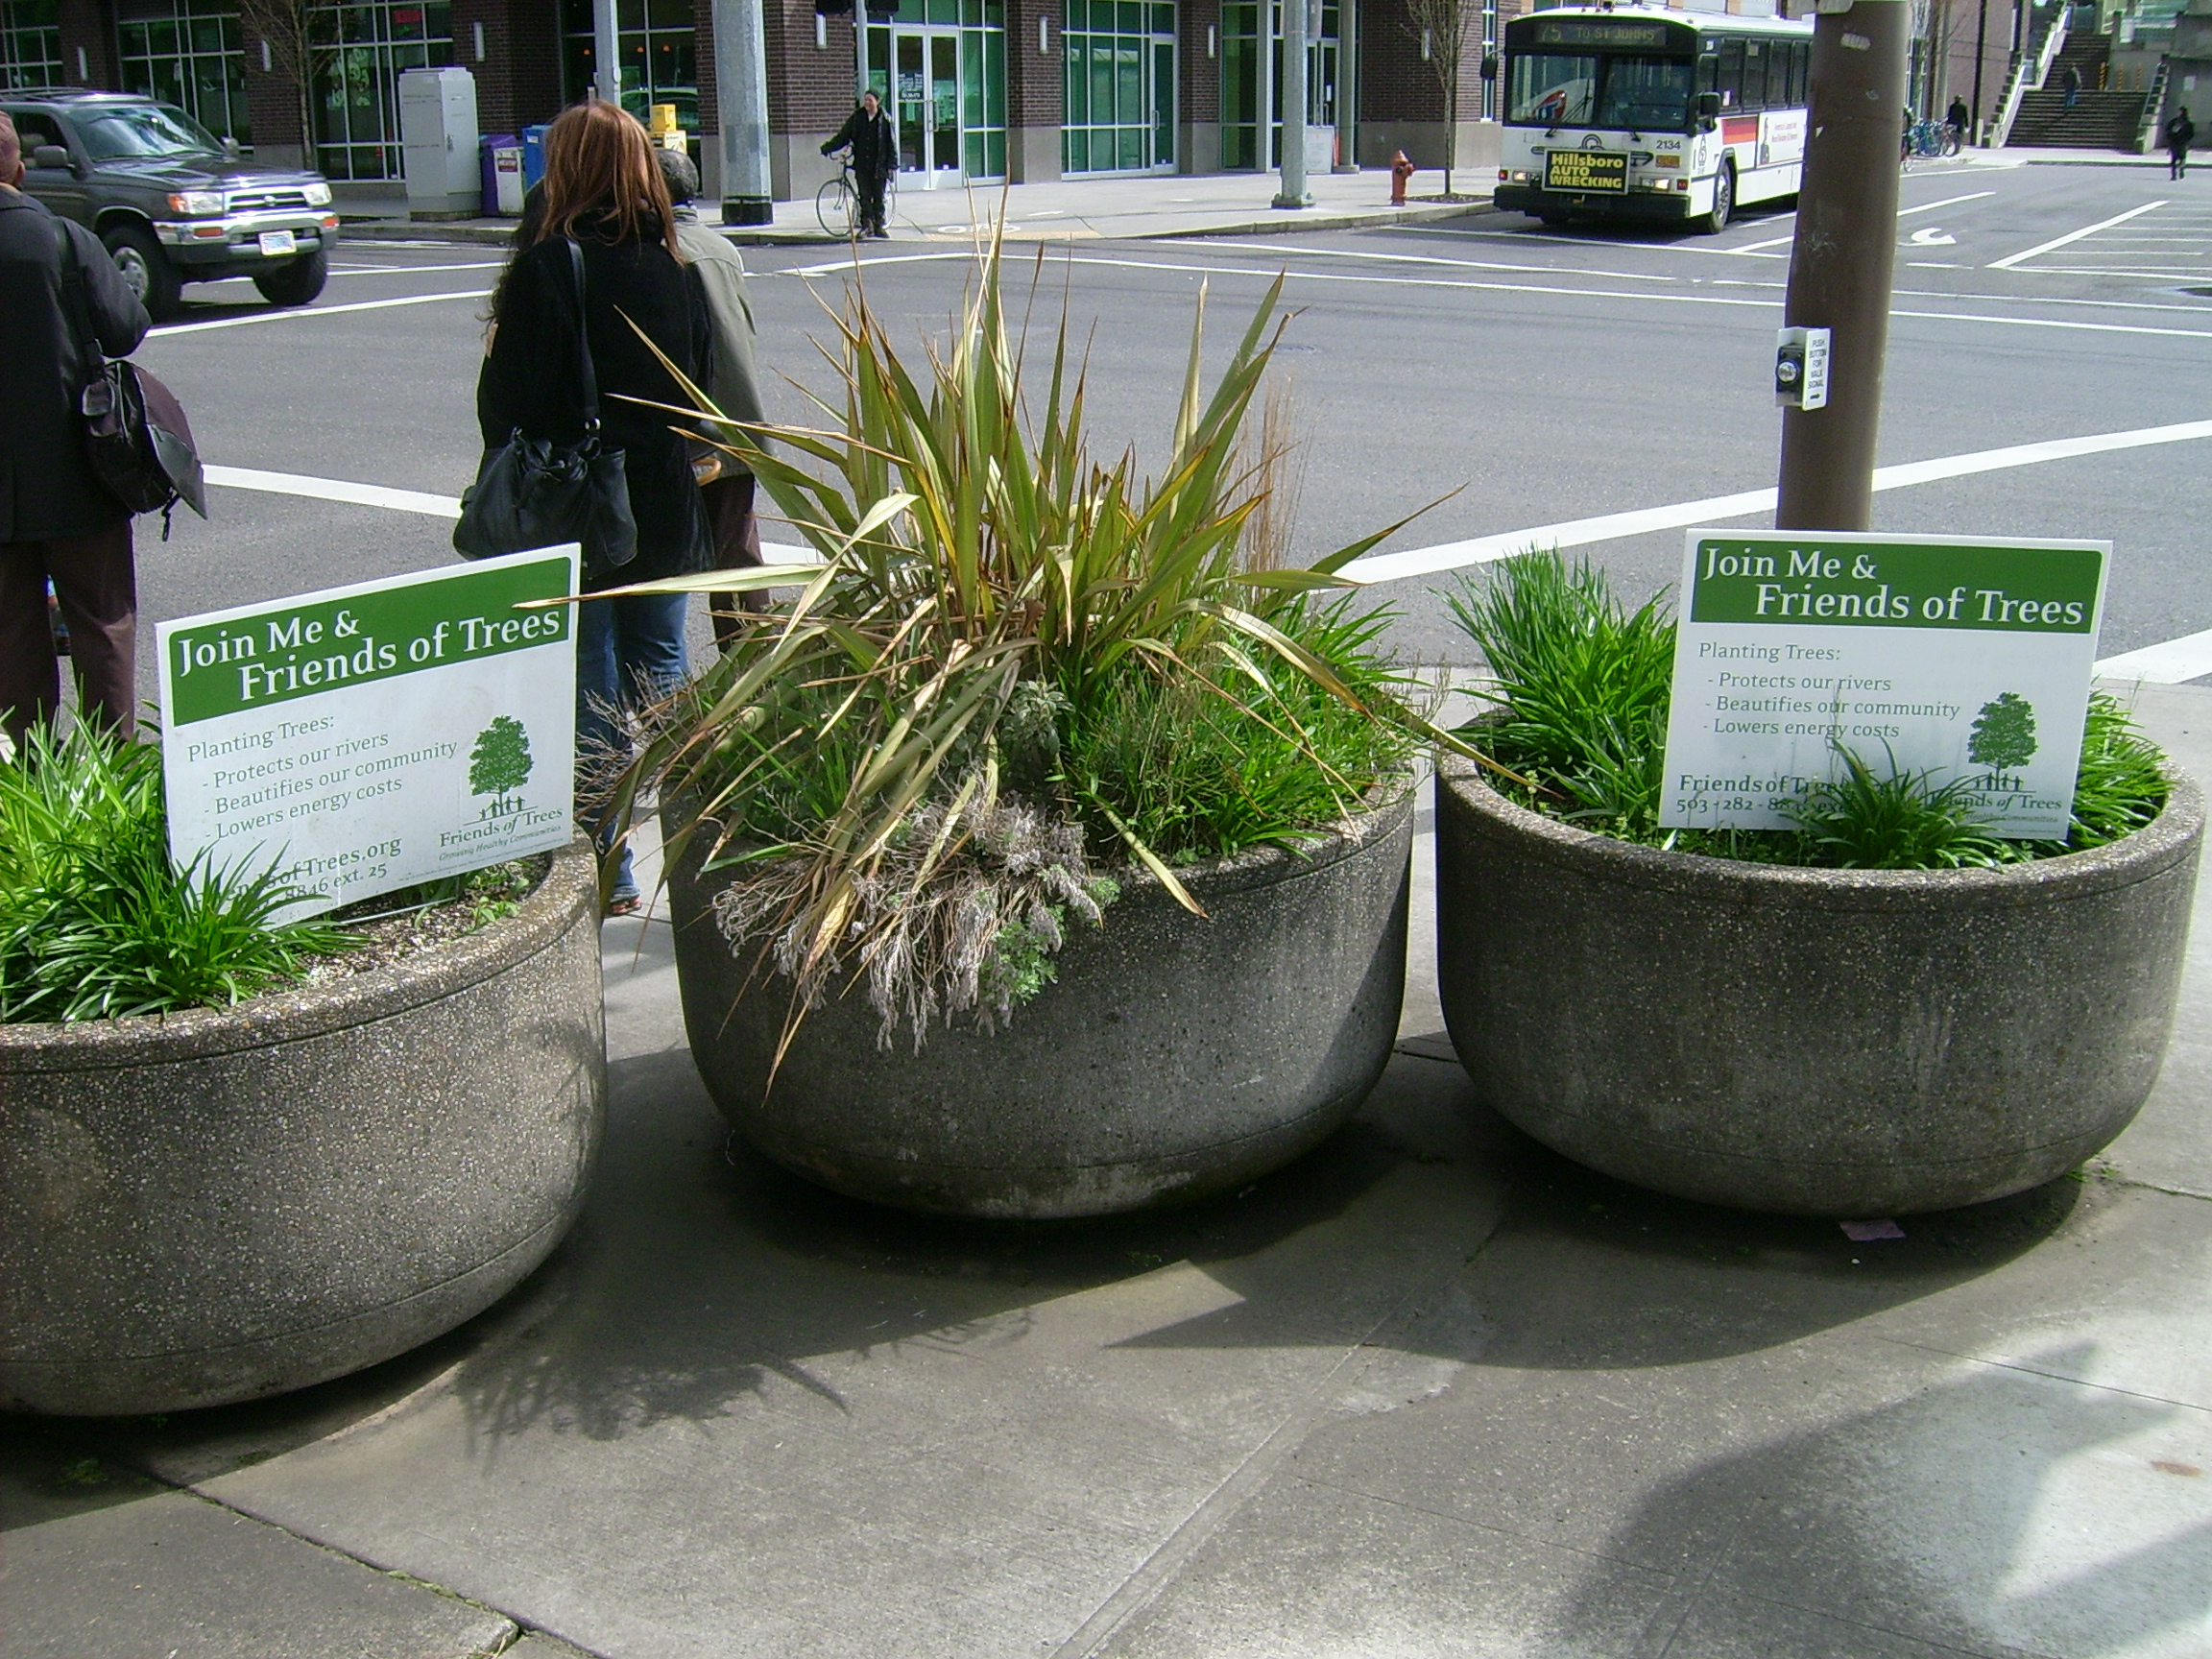 Signs promoting an environmental project in the streets of Portland, OR.